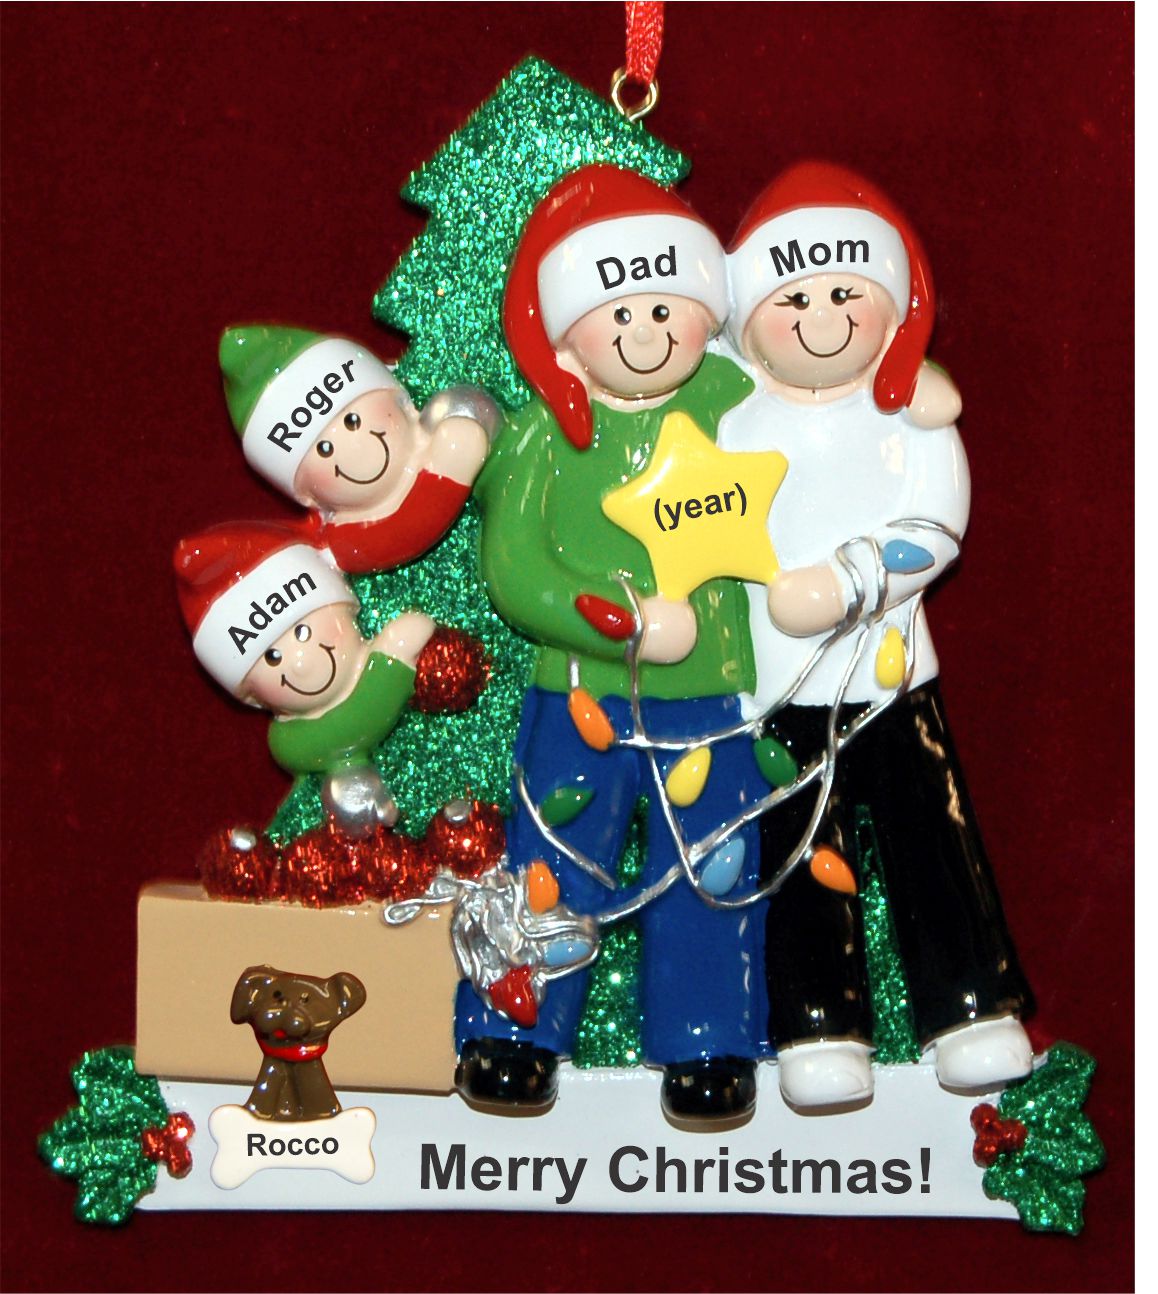 Let's Decorate! Family of 4 Christmas Ornament with Pets Personalized by RussellRhodes.com